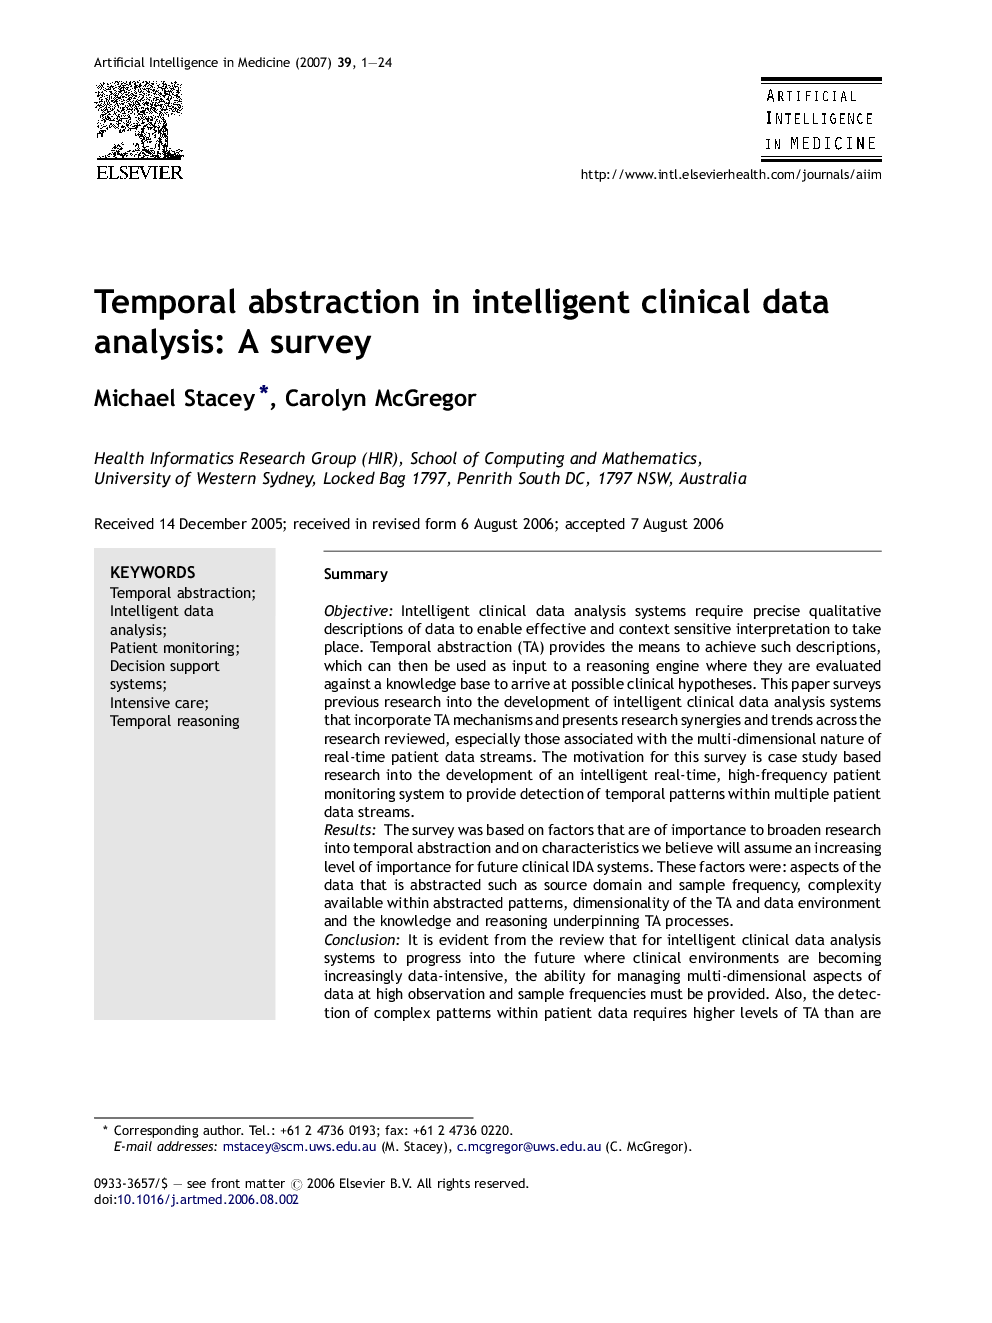 Temporal abstraction in intelligent clinical data analysis: A survey